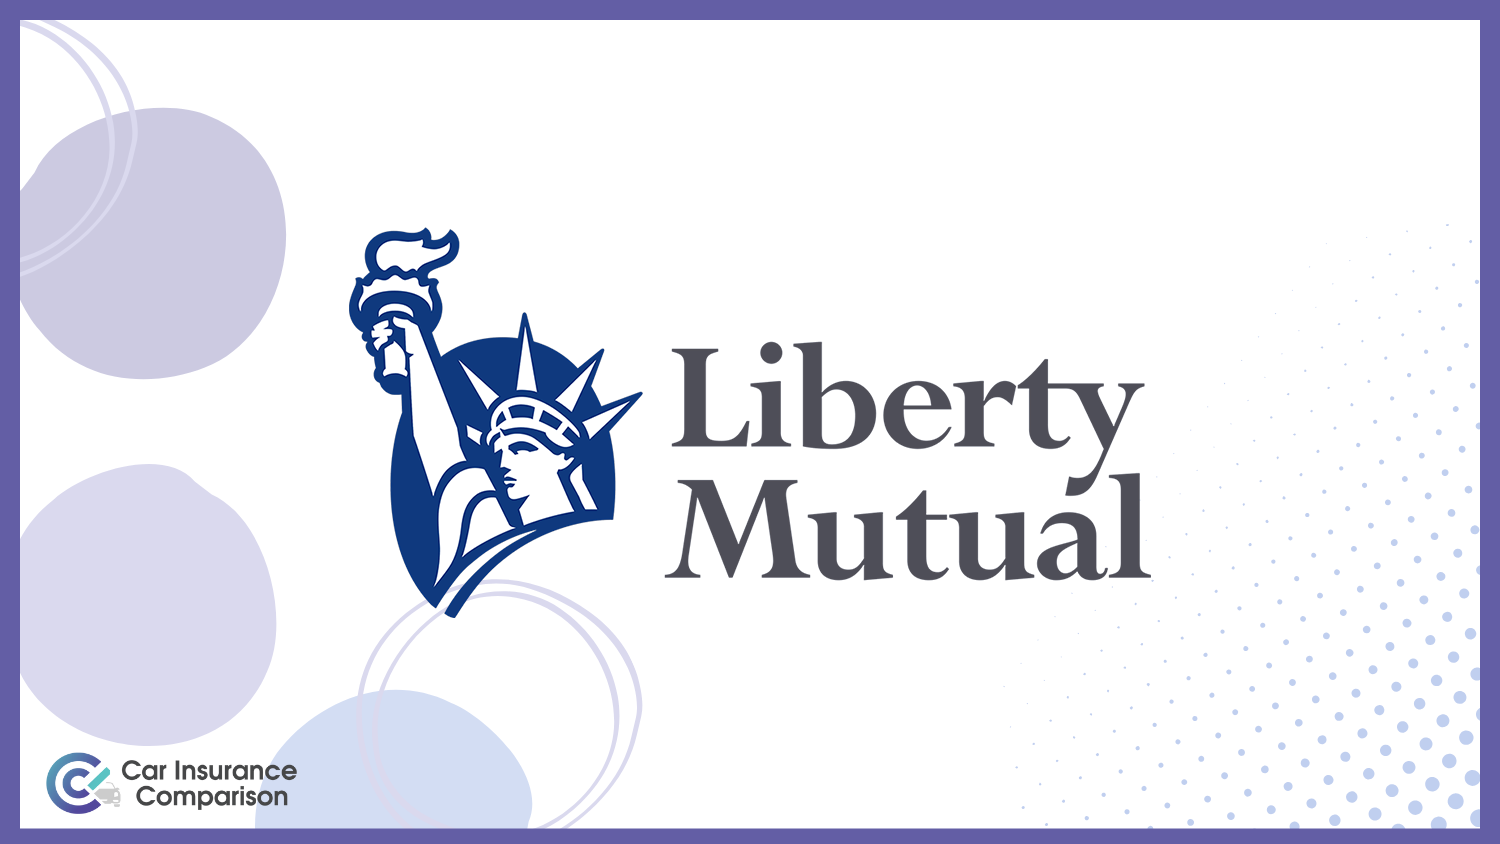 Liberty Mutual: Best Car Insurance for a Bad Driving Record